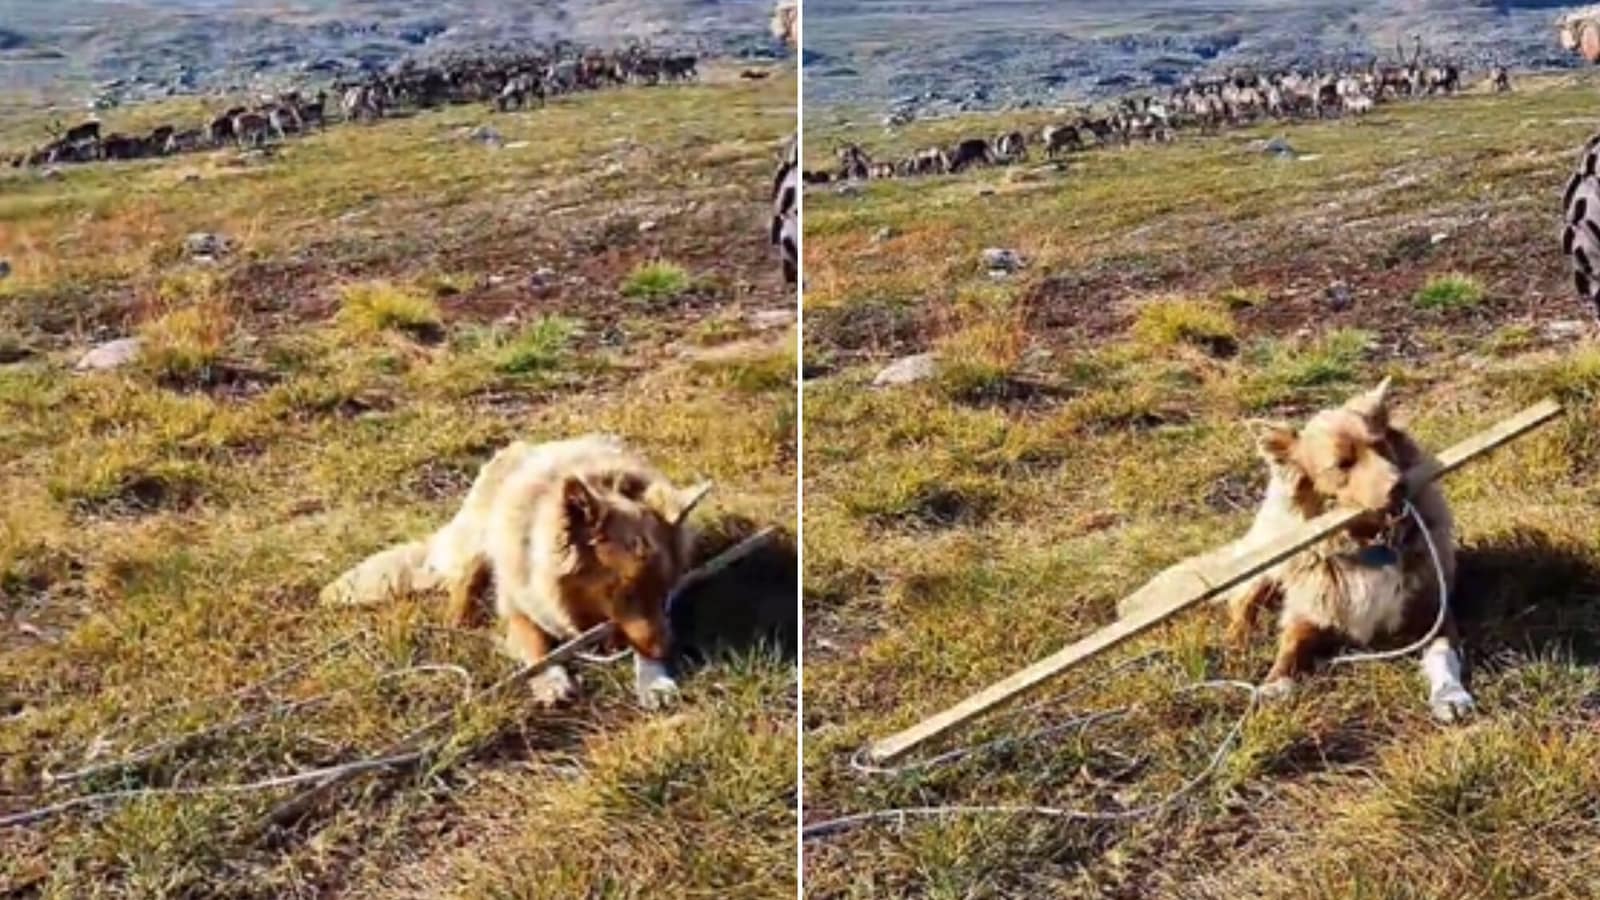 Guard dog chewing stick suddenly realises he has a job to do. Watch